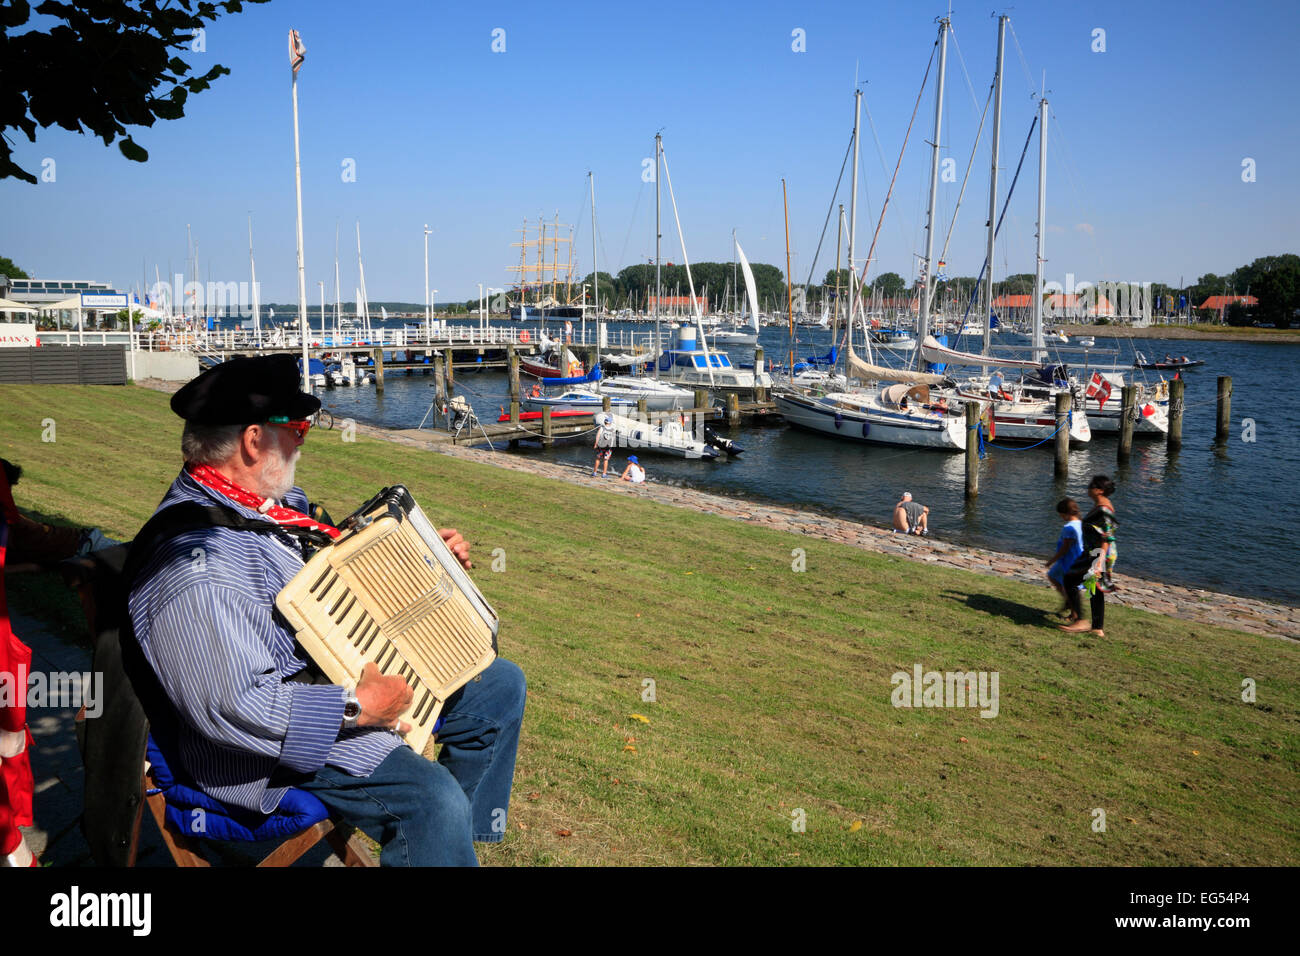 Traditional musician at river Trave, Travemuende, Baltic Sea coast, Germany, Europe Stock Photo